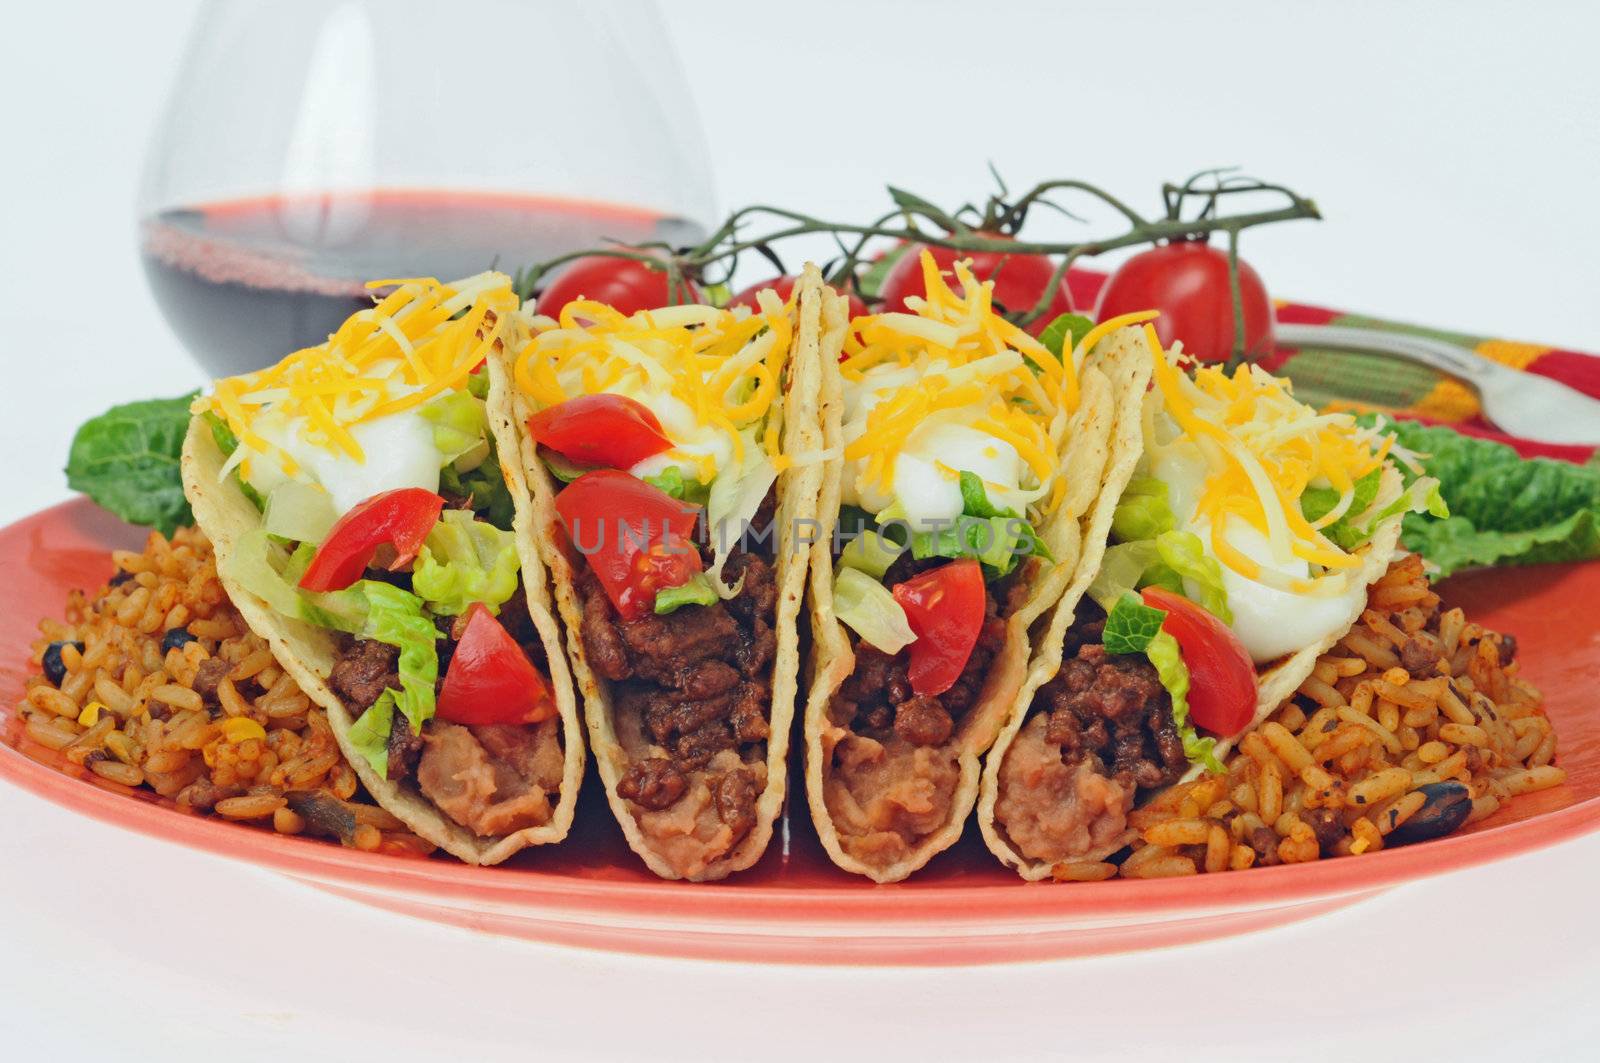 Tacos by billberryphotography